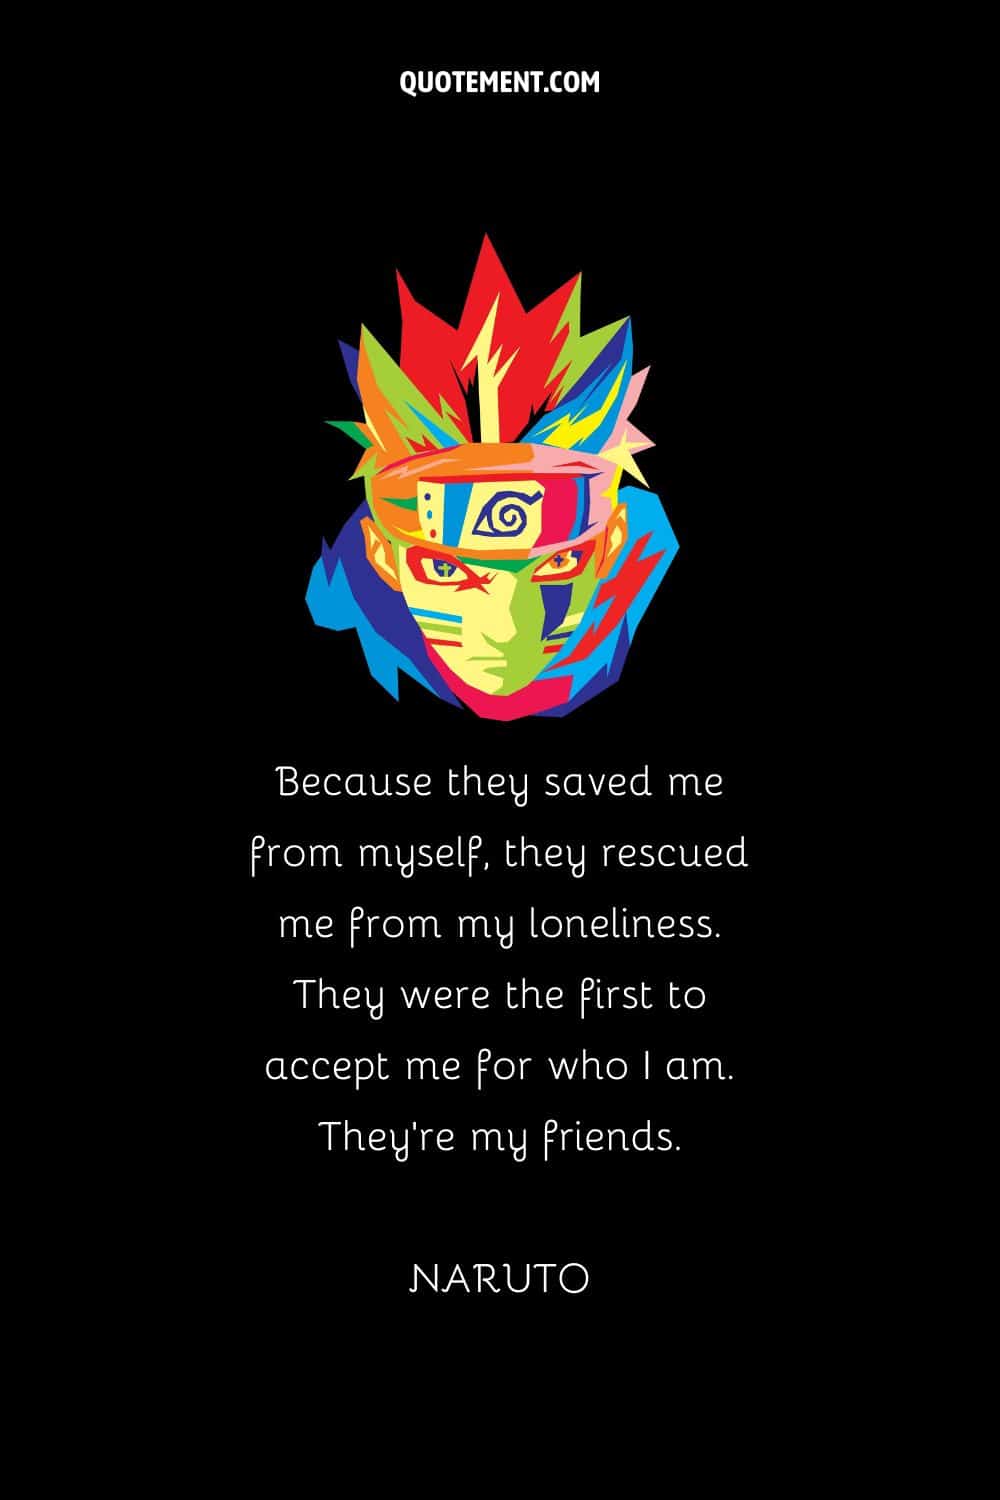 “Because they saved me from myself, they rescued me from my loneliness. They were the first to accept me for who I am. They’re my friends.” — Naruto